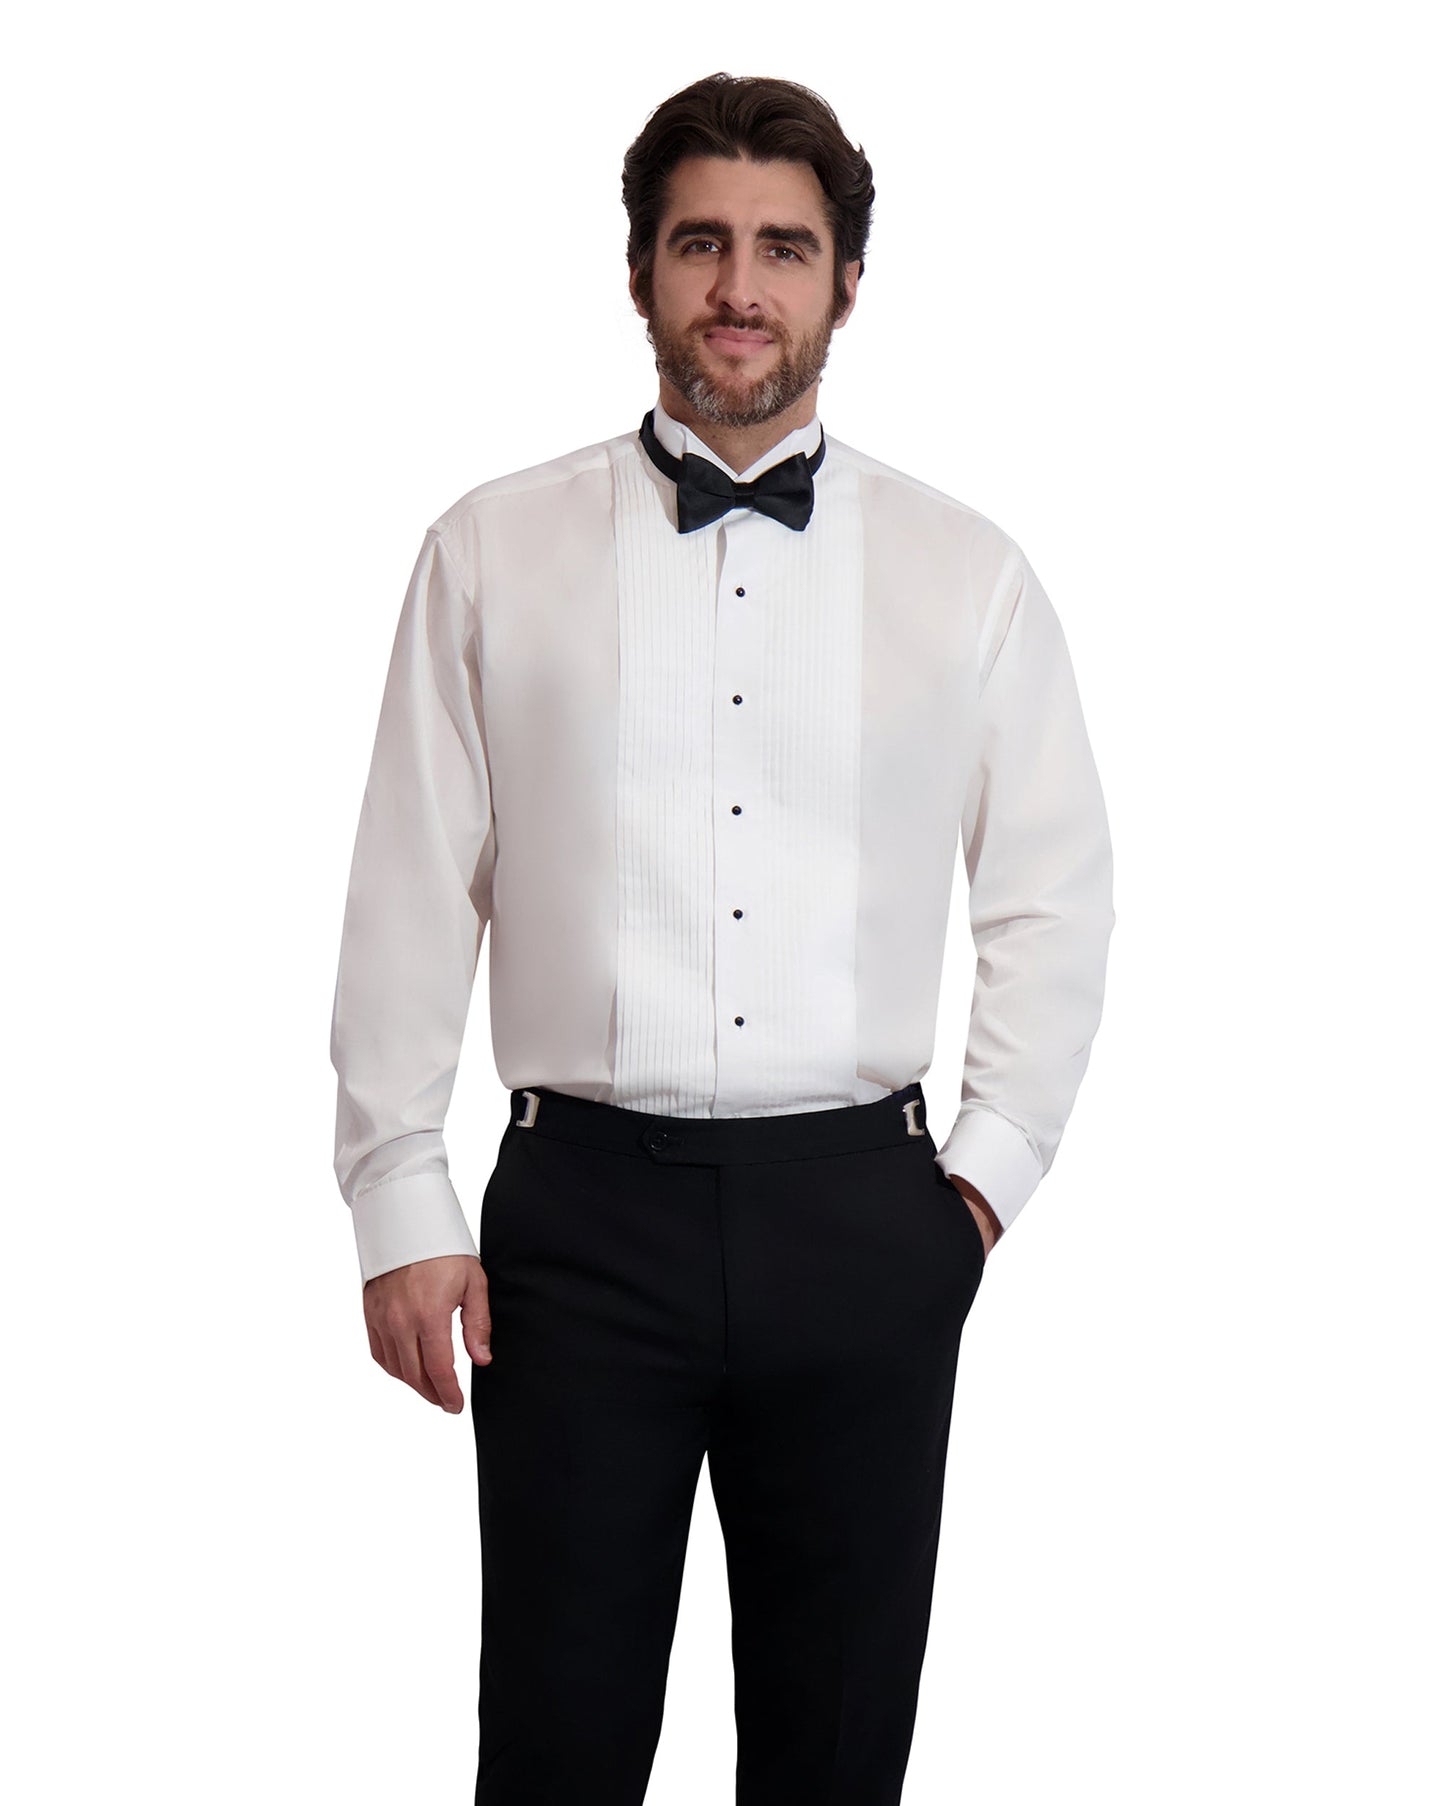 Neil Allyn Slim Fit Wing Collar Tuxedo Shirt in a Polycotton Blend with 1/4" Pleats and Barrel Cuffs